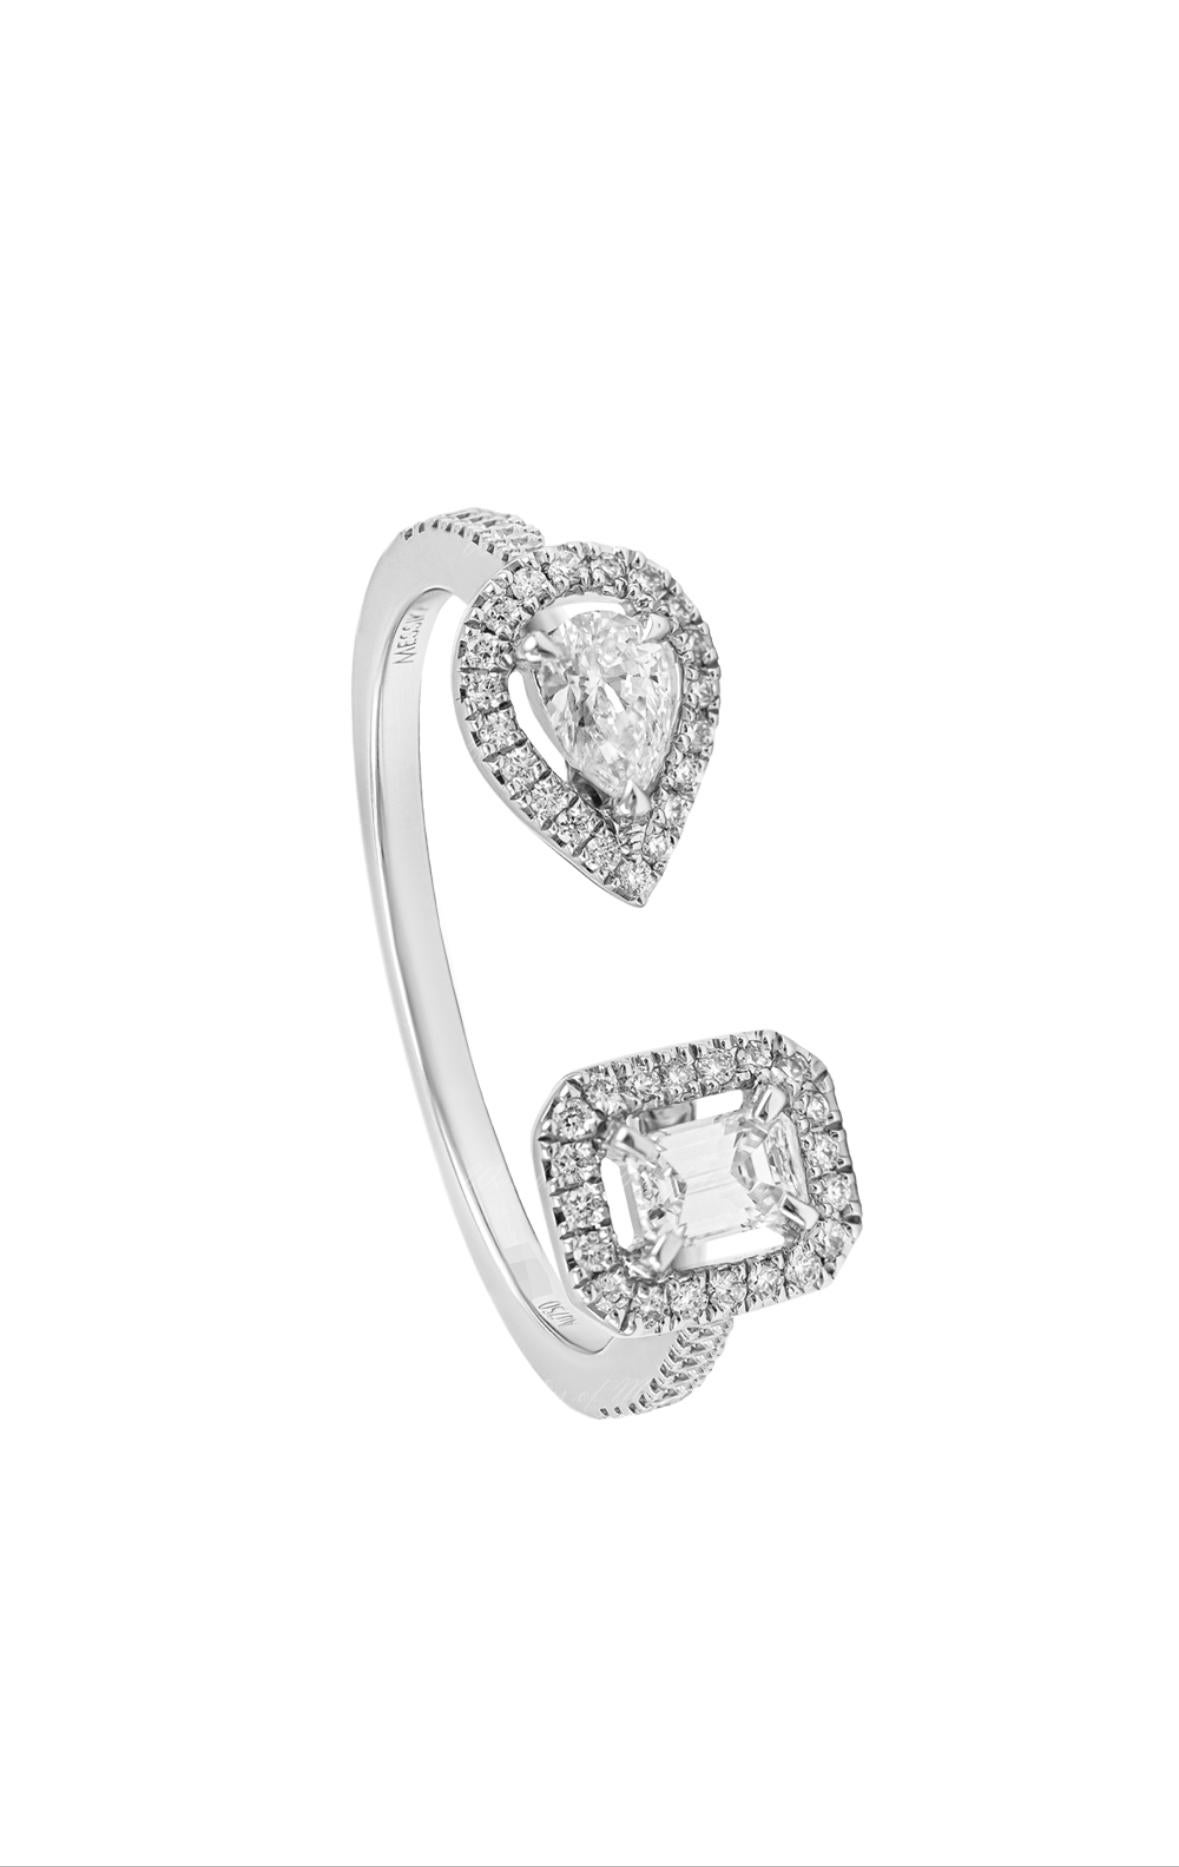 From Messika My Twin Collection. Playing with a horizontal motif and a vertical one, this 18K white gold open band wraps the finger with a glittering light, uniting an emerald-cut diamond and sparkling pear-cut diamond. Enhanced by a delicate